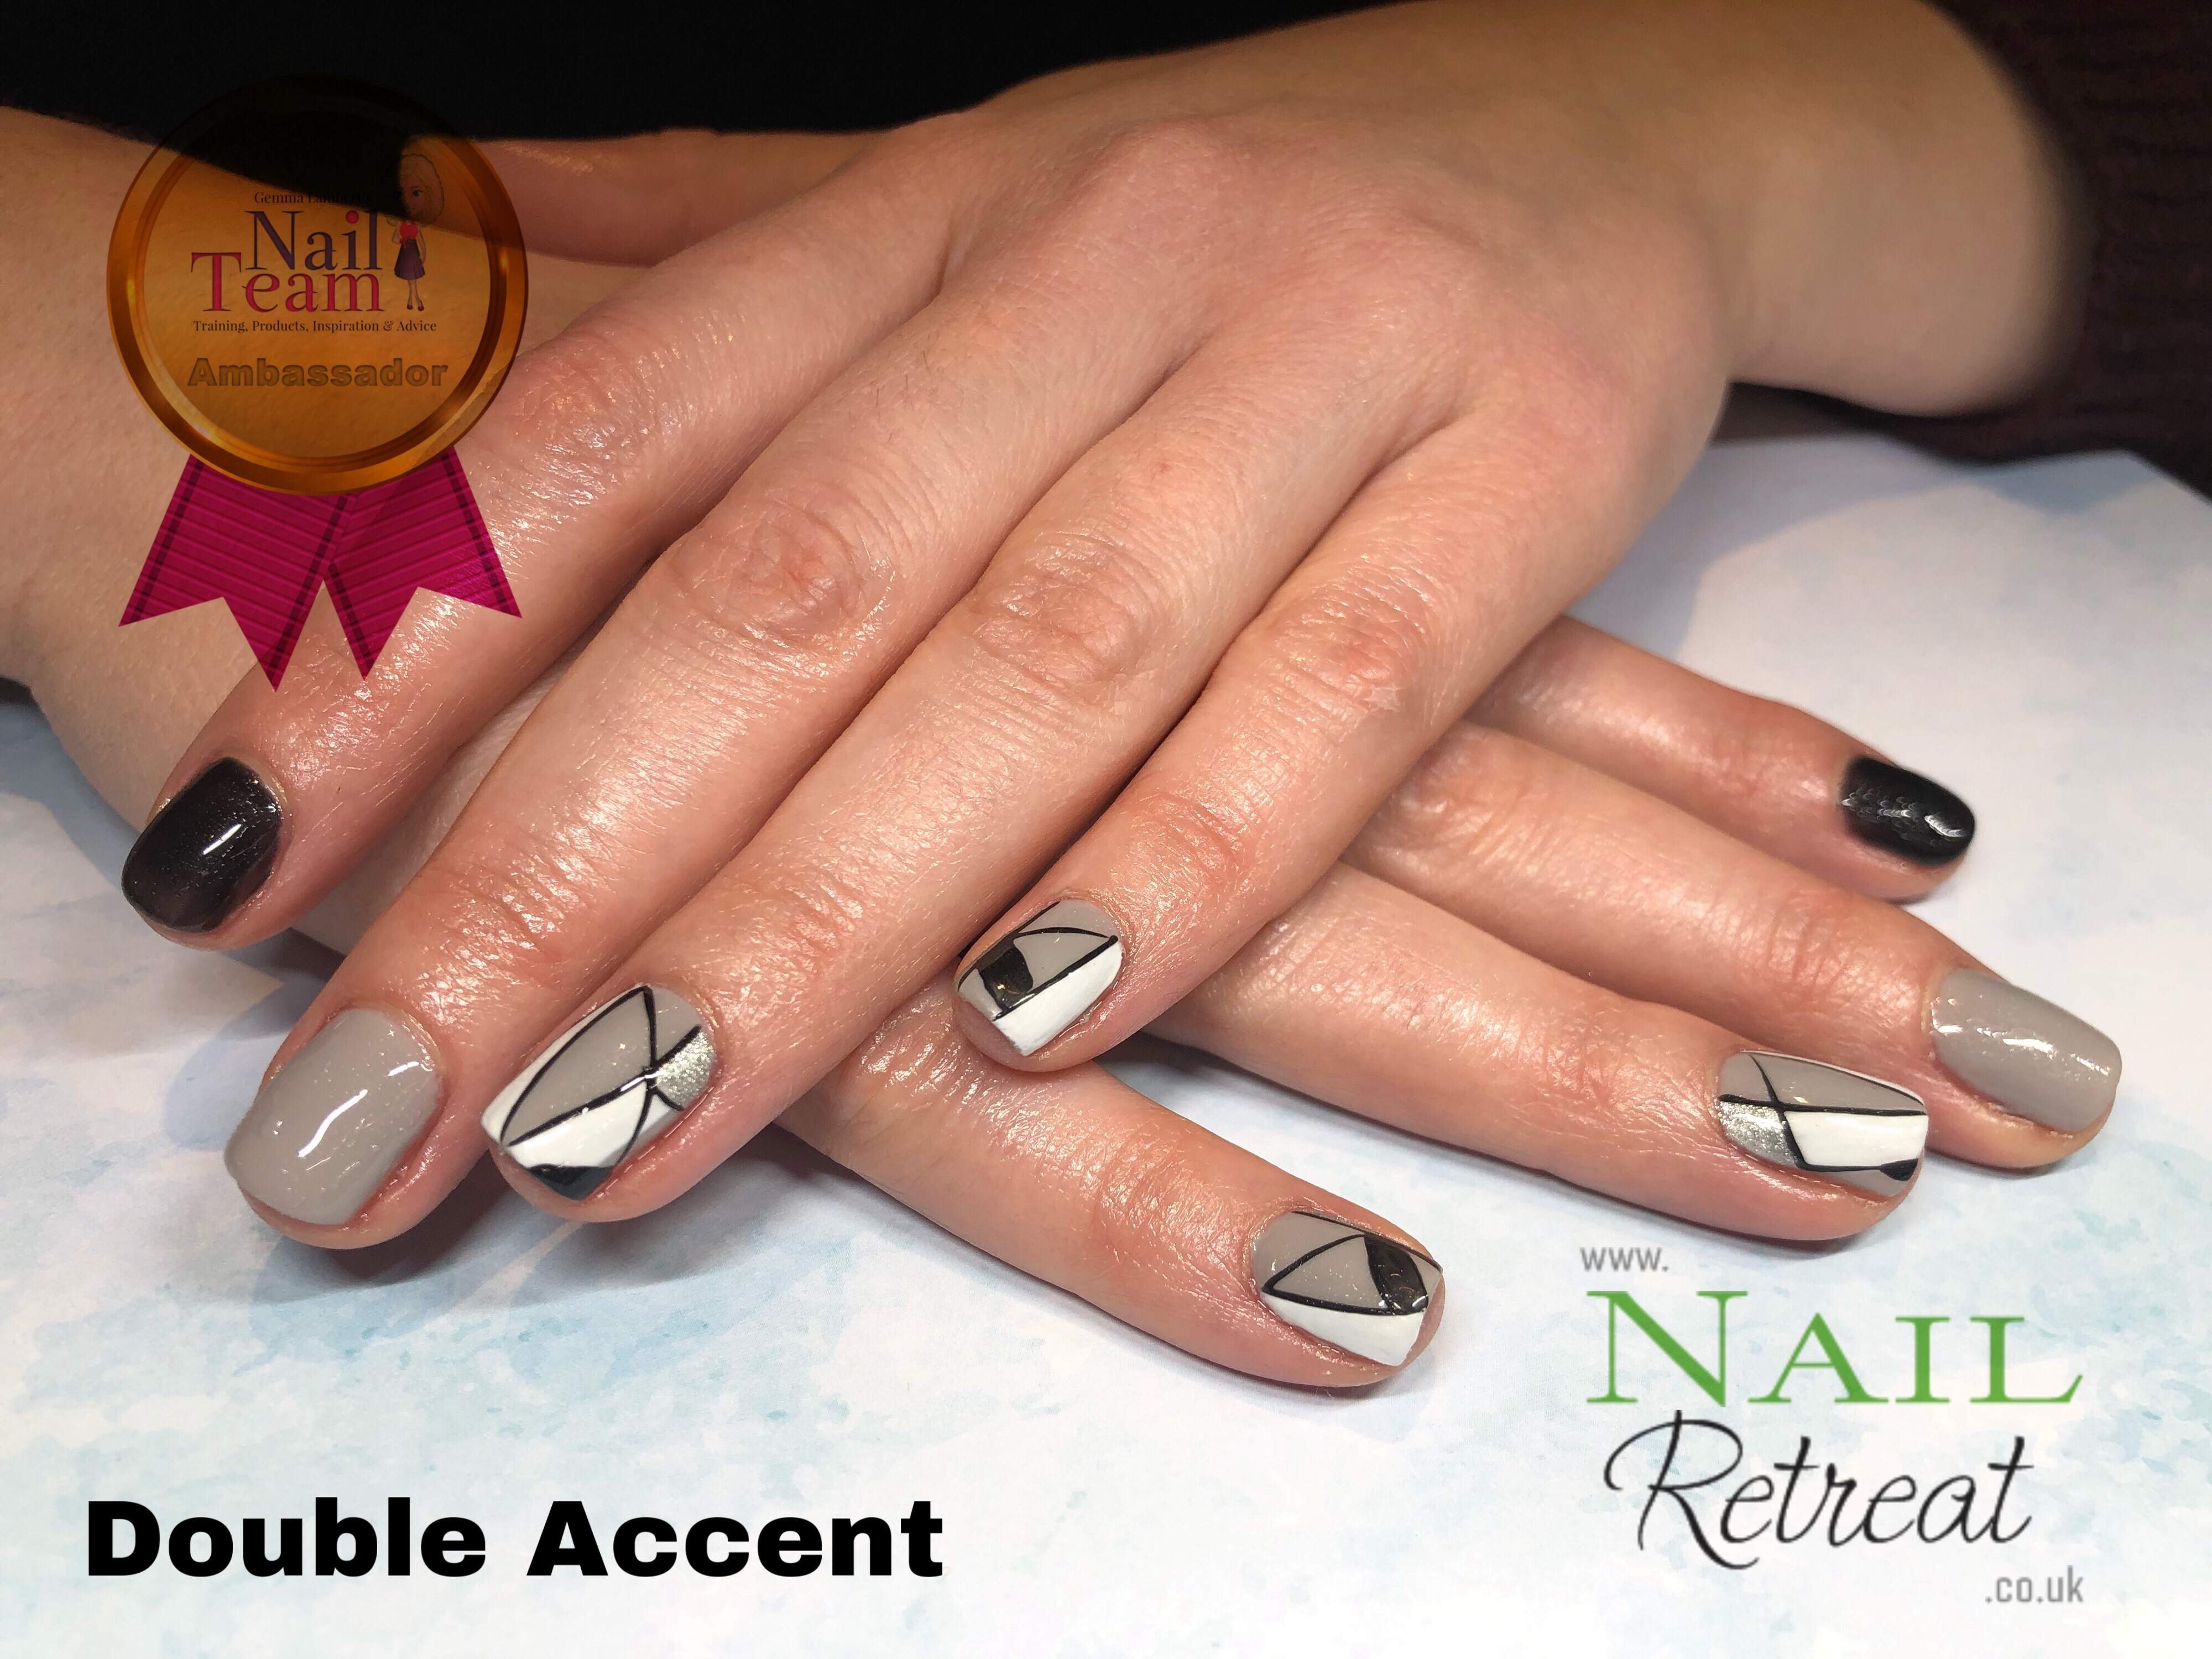 8. The Nail Retreat - wide 5